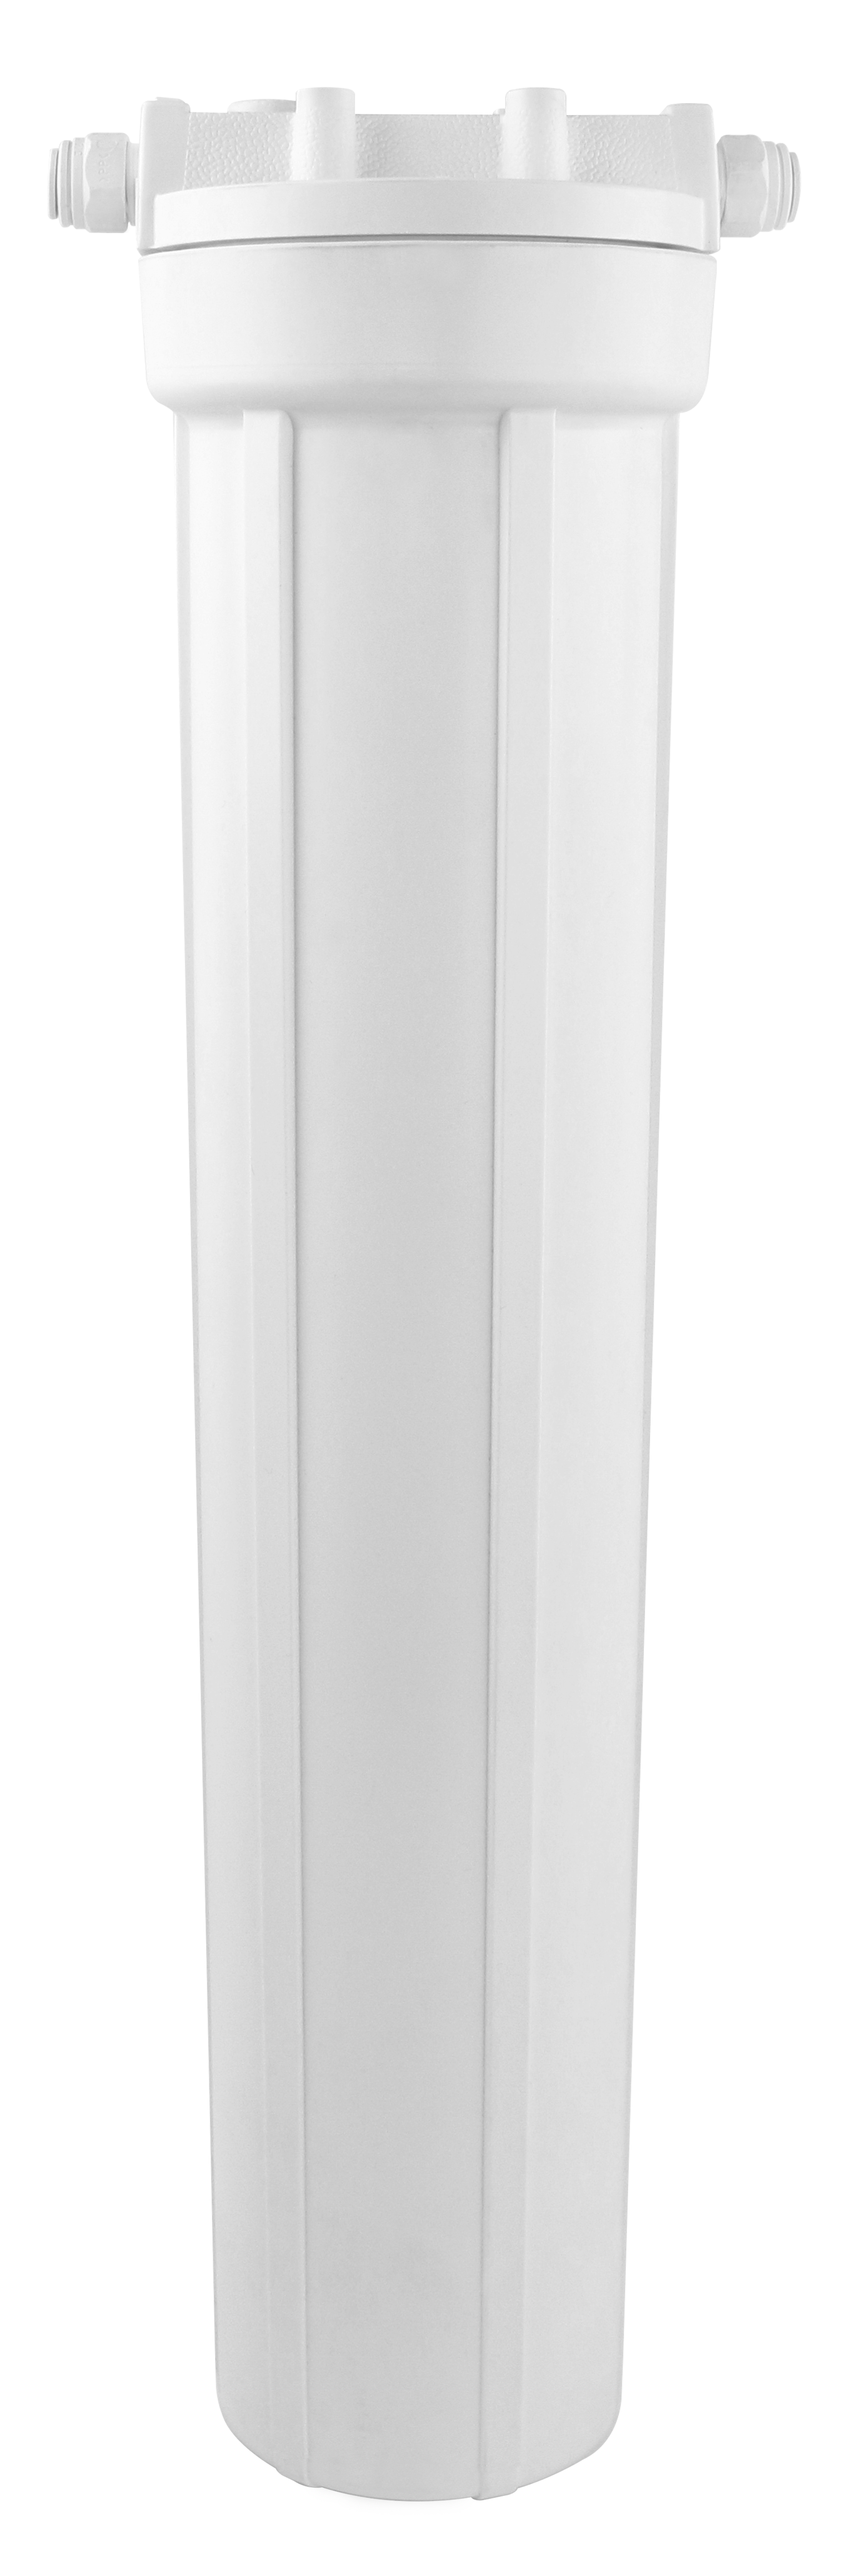 20 Inch White Housing with 3/8" Quick Connect Fitting